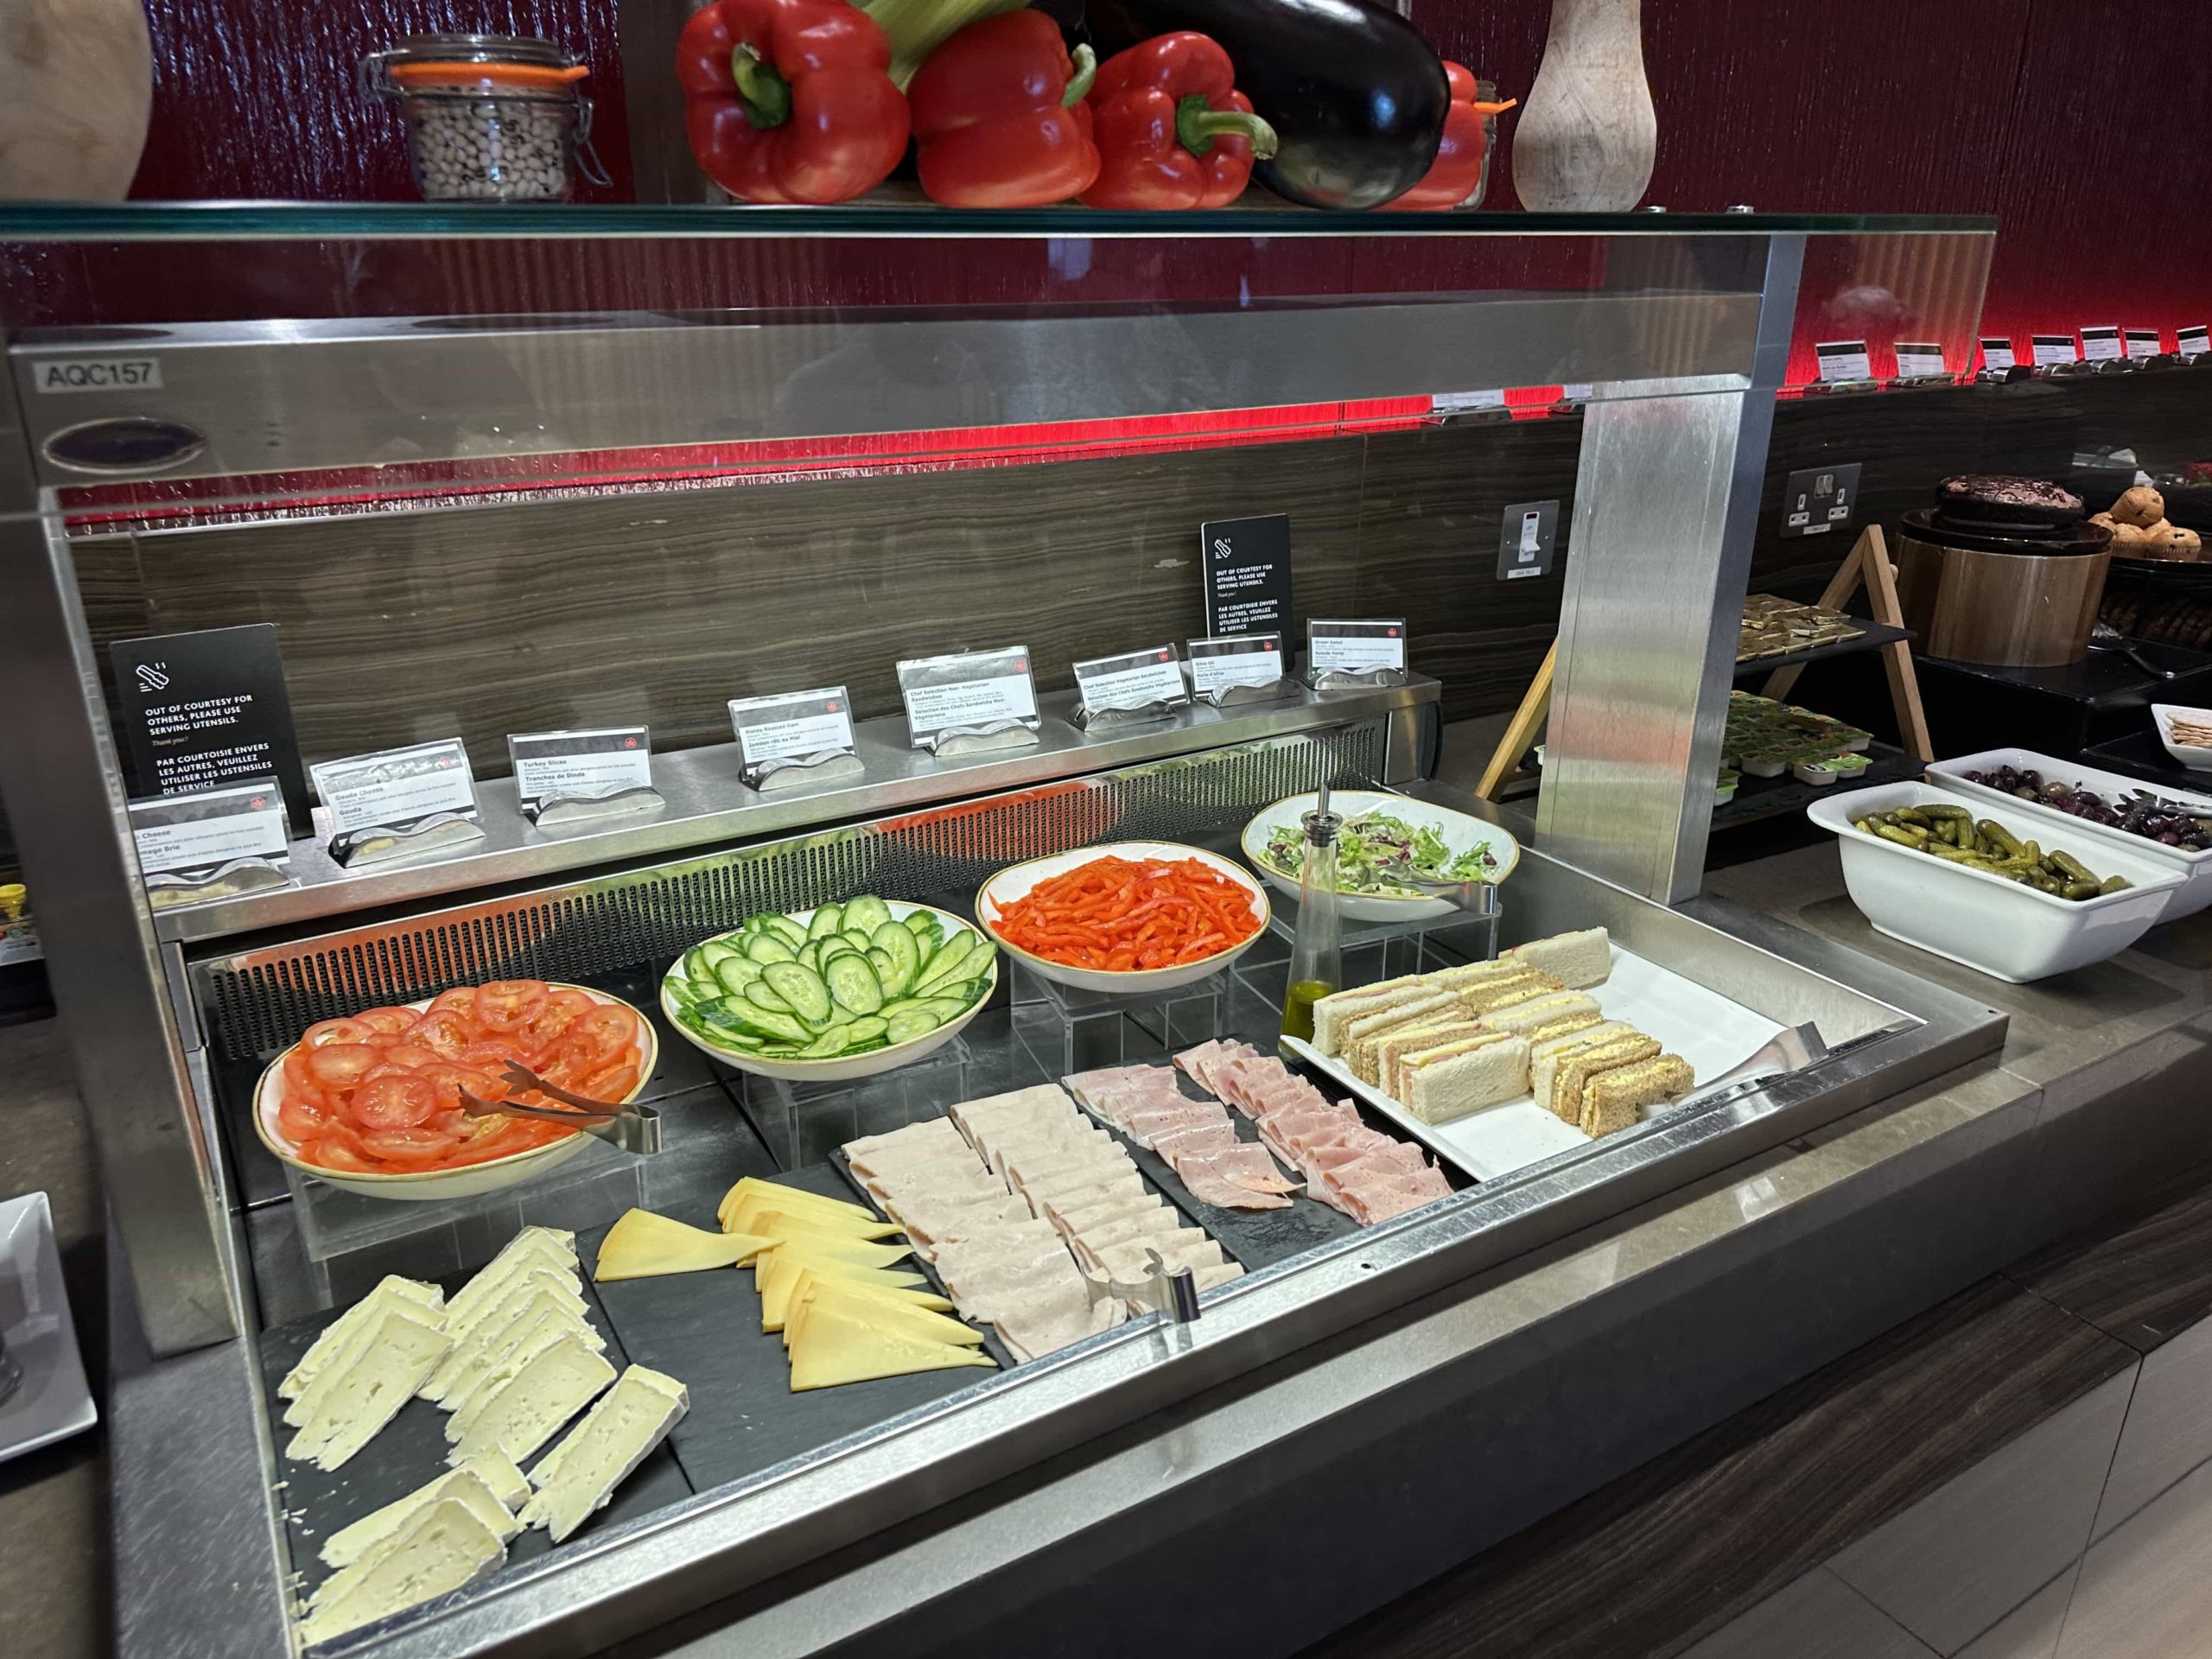 Salad items, cold cut meats, and cheeses within a buffet station